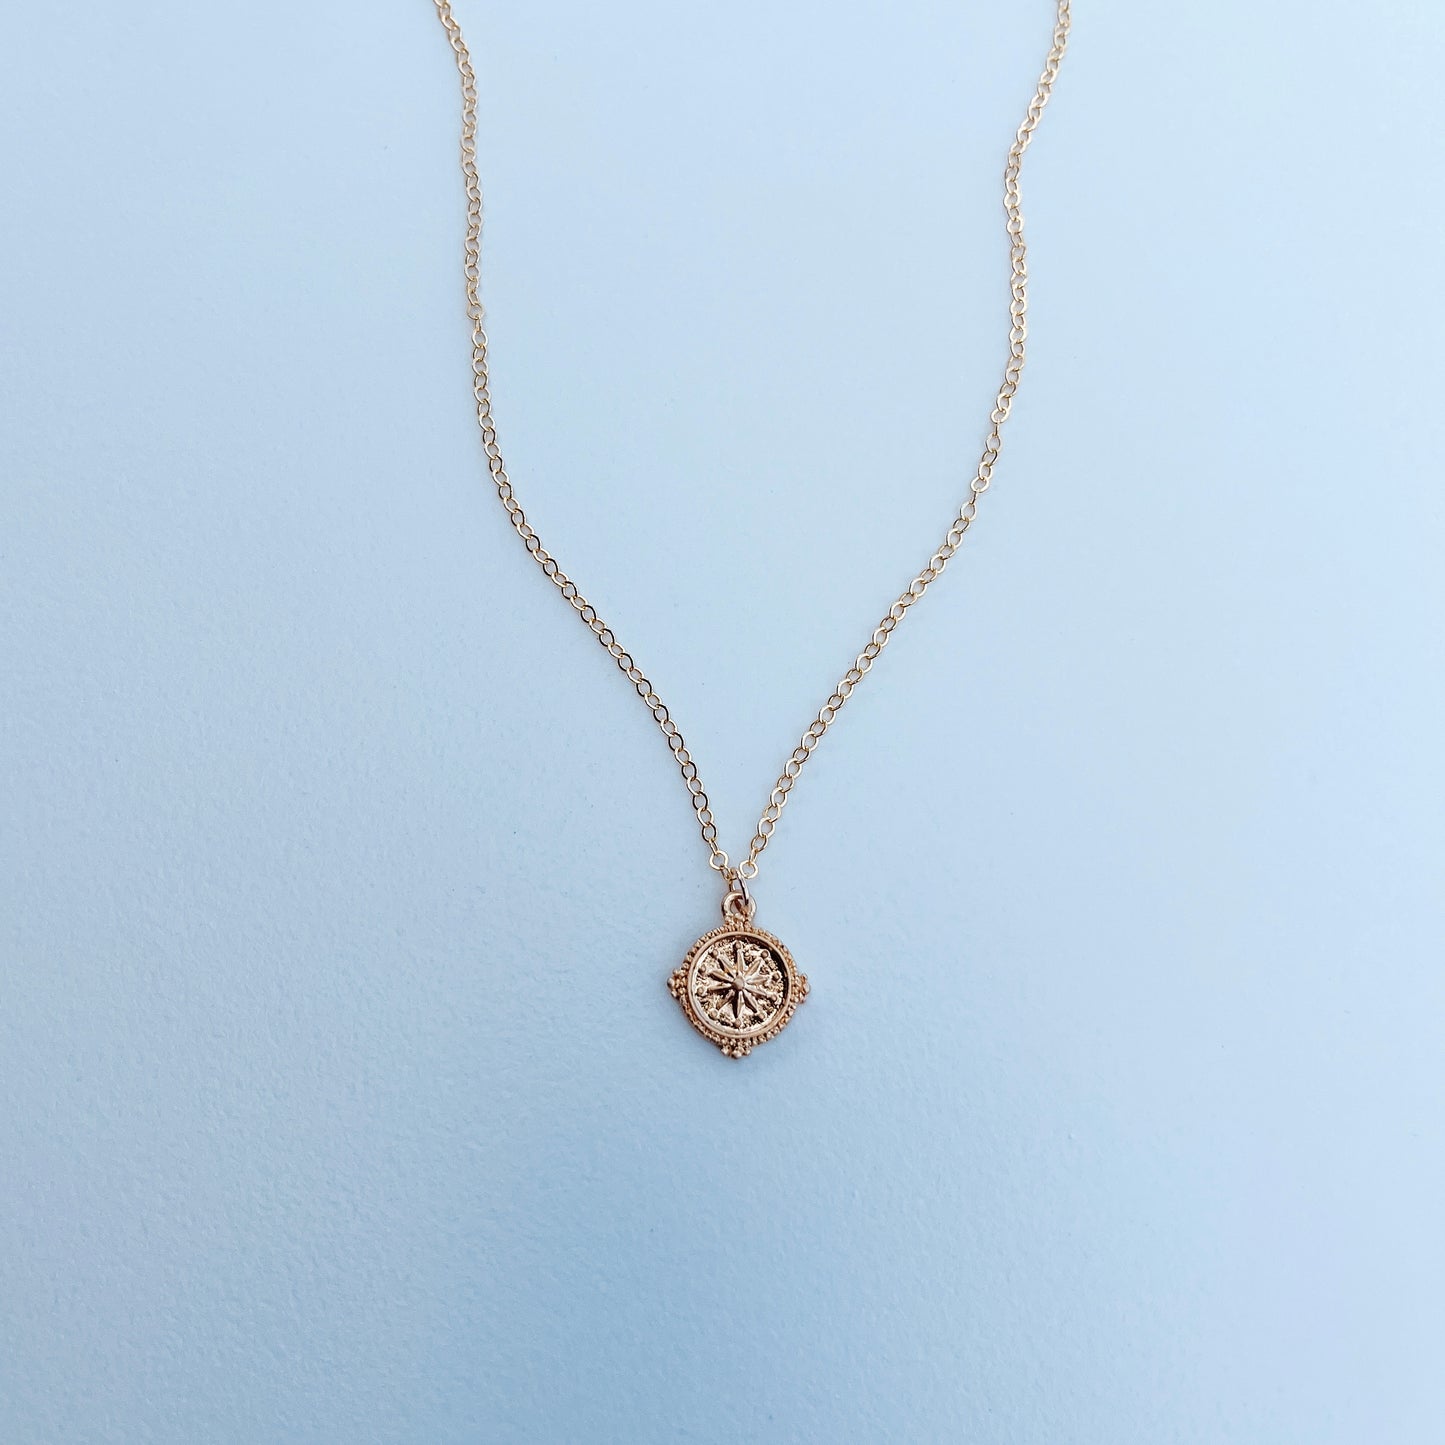 The Compass Necklace